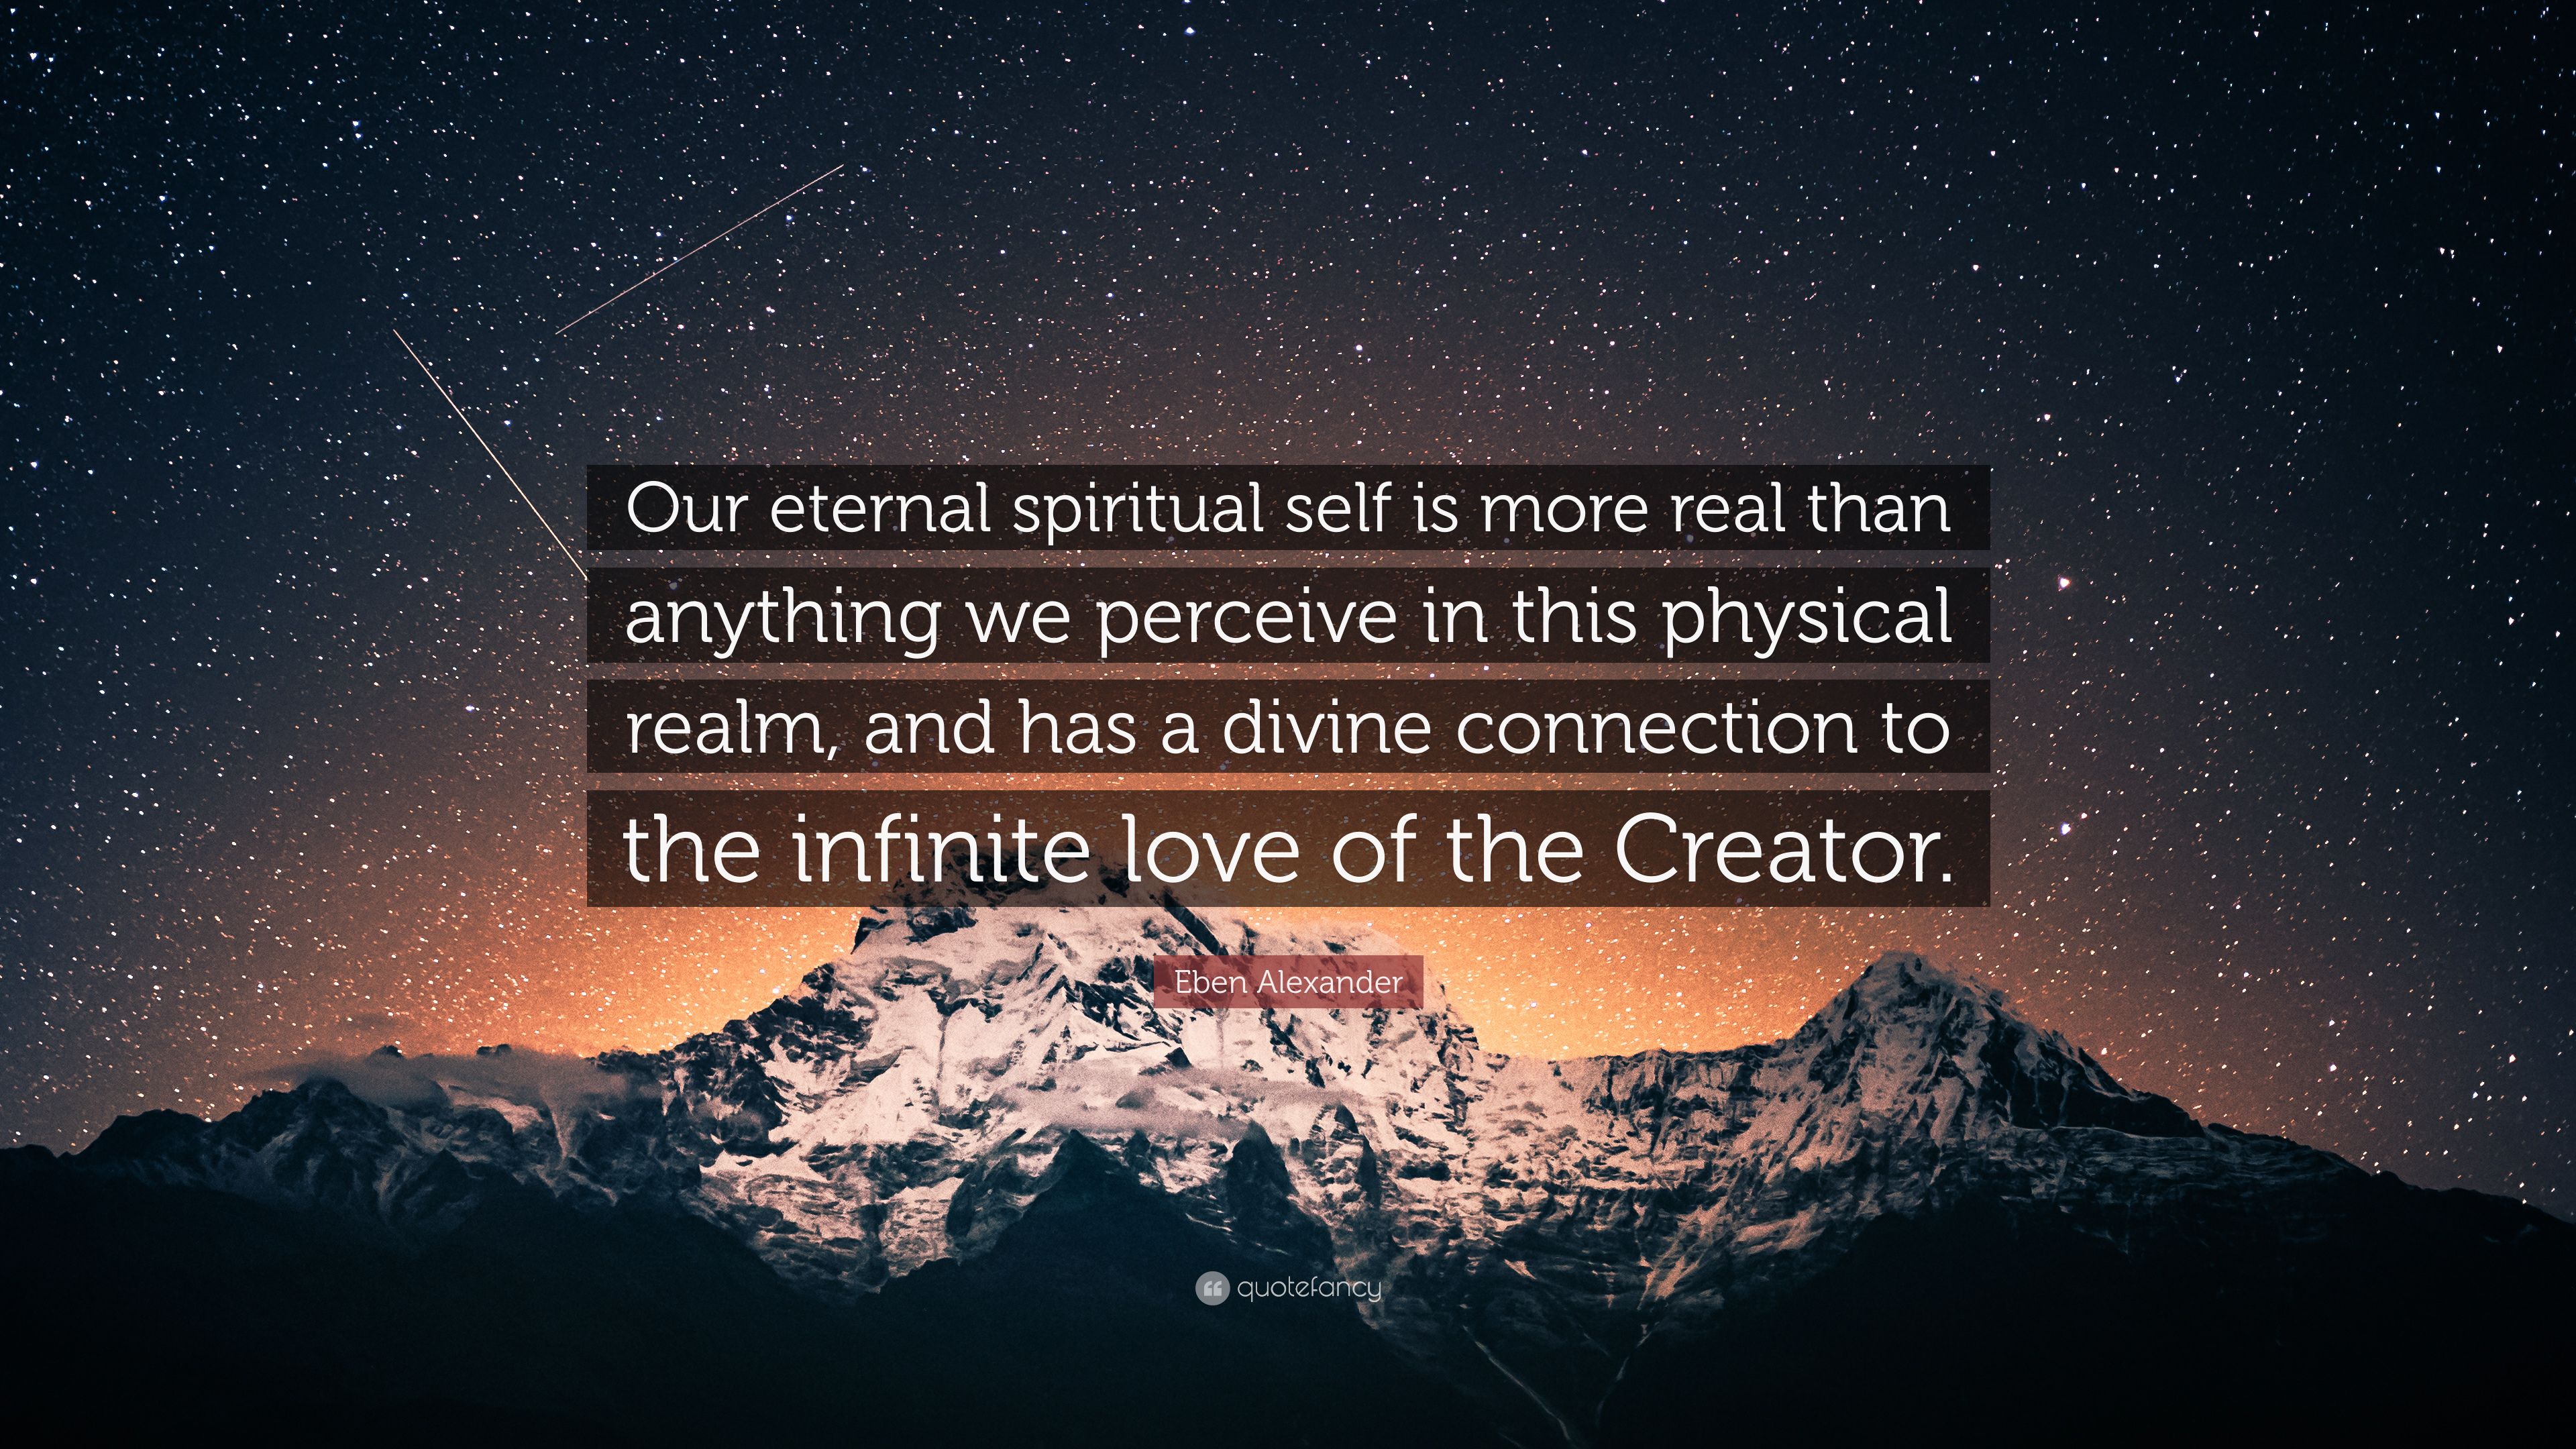 Eben Alexander Quote: “Our eternal spiritual self is more real